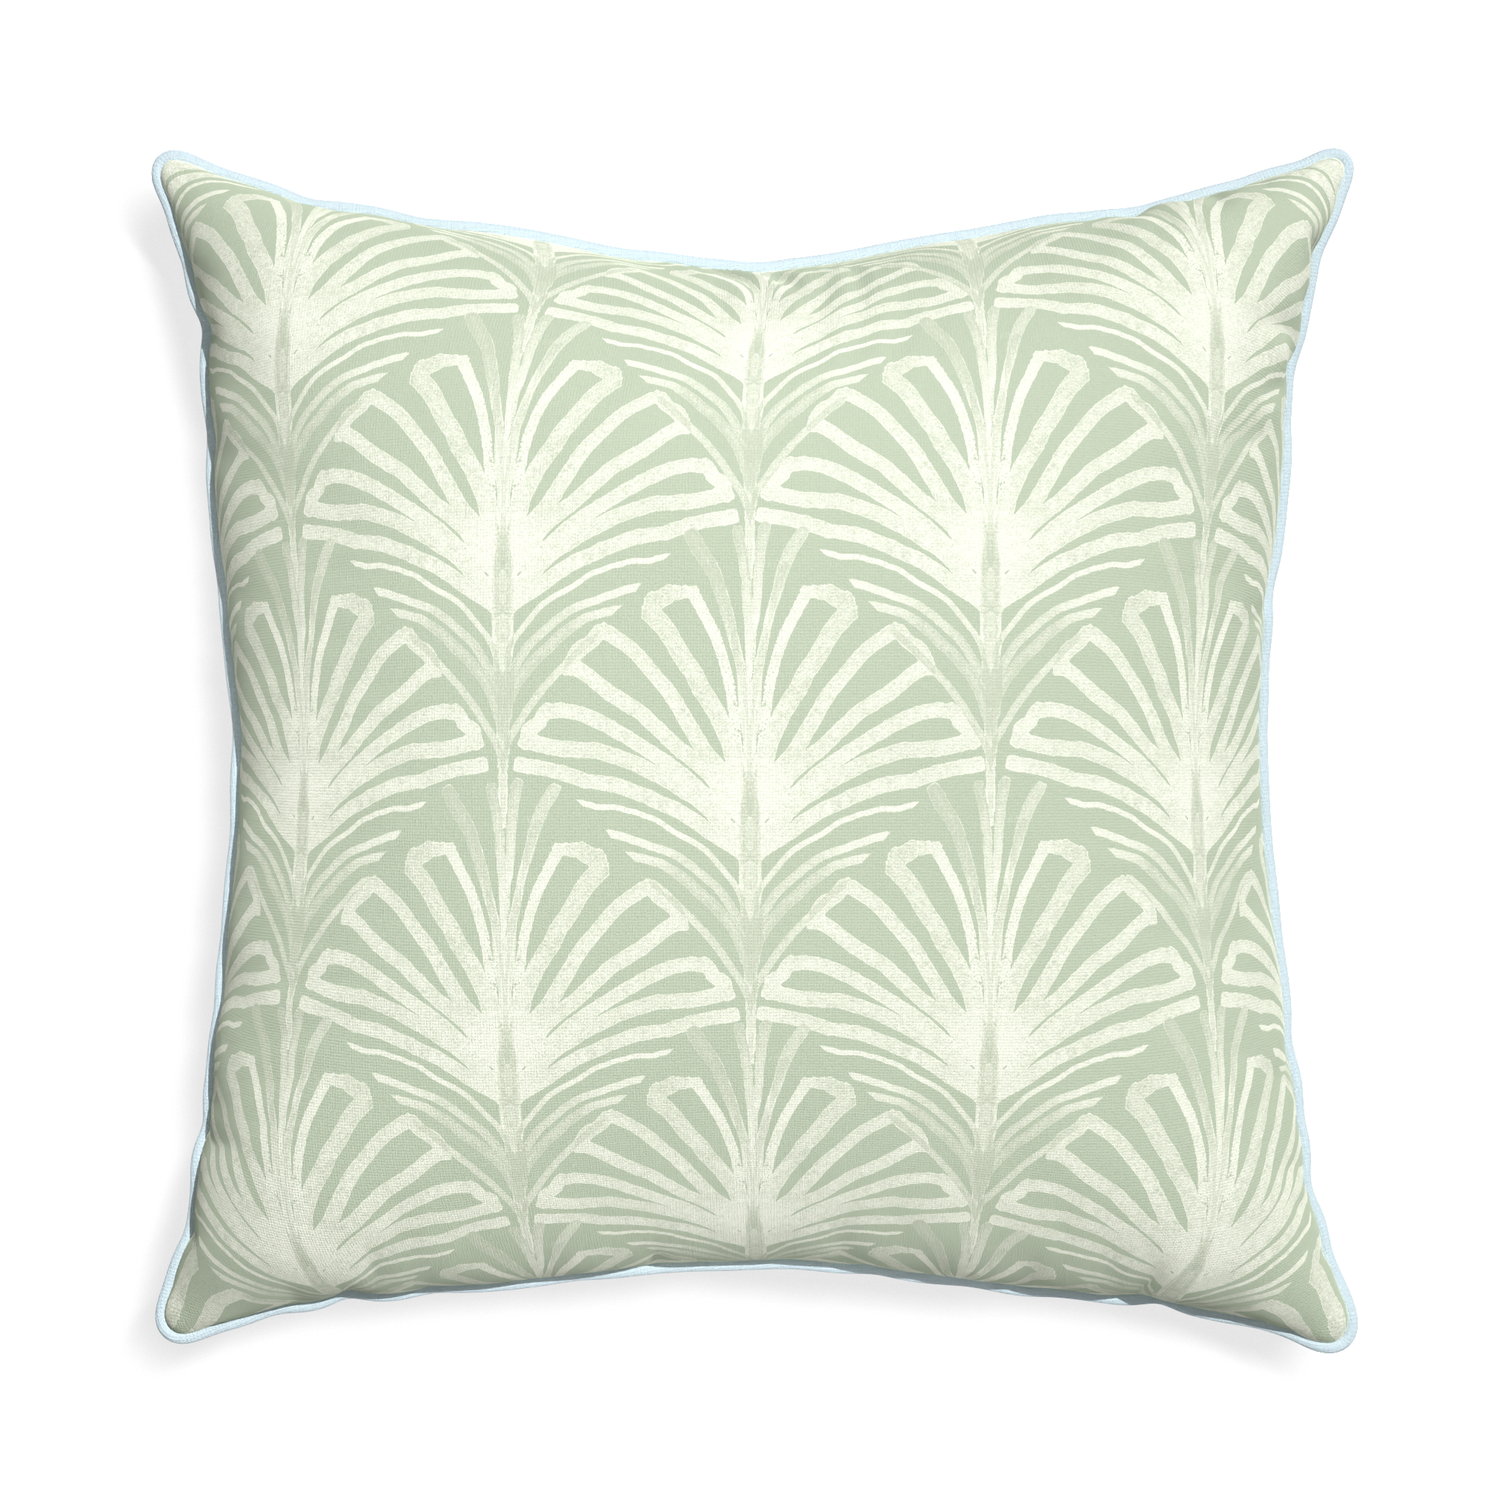 Euro-sham suzy sage custom pillow with powder piping on white background